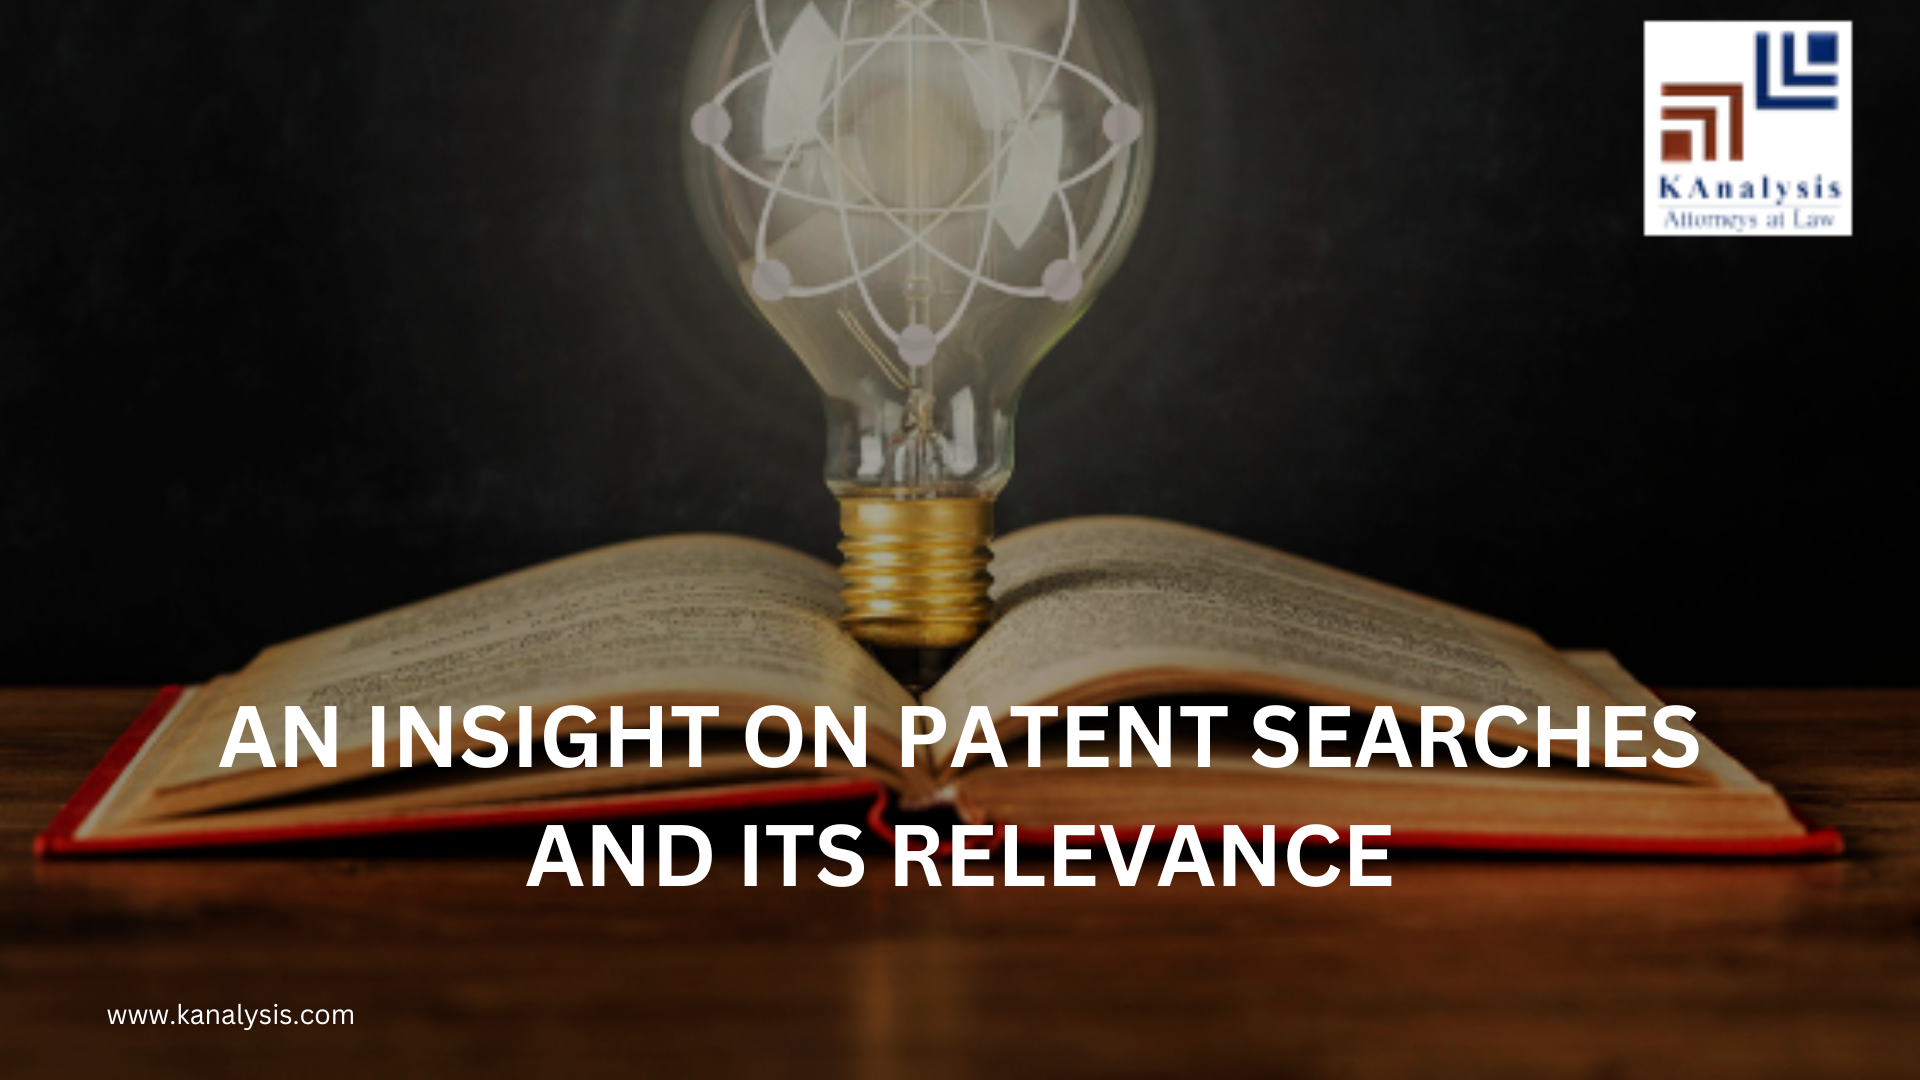 You are currently viewing AN INSIGHT ON PATENT SEARCHES AND ITS RELEVANCE